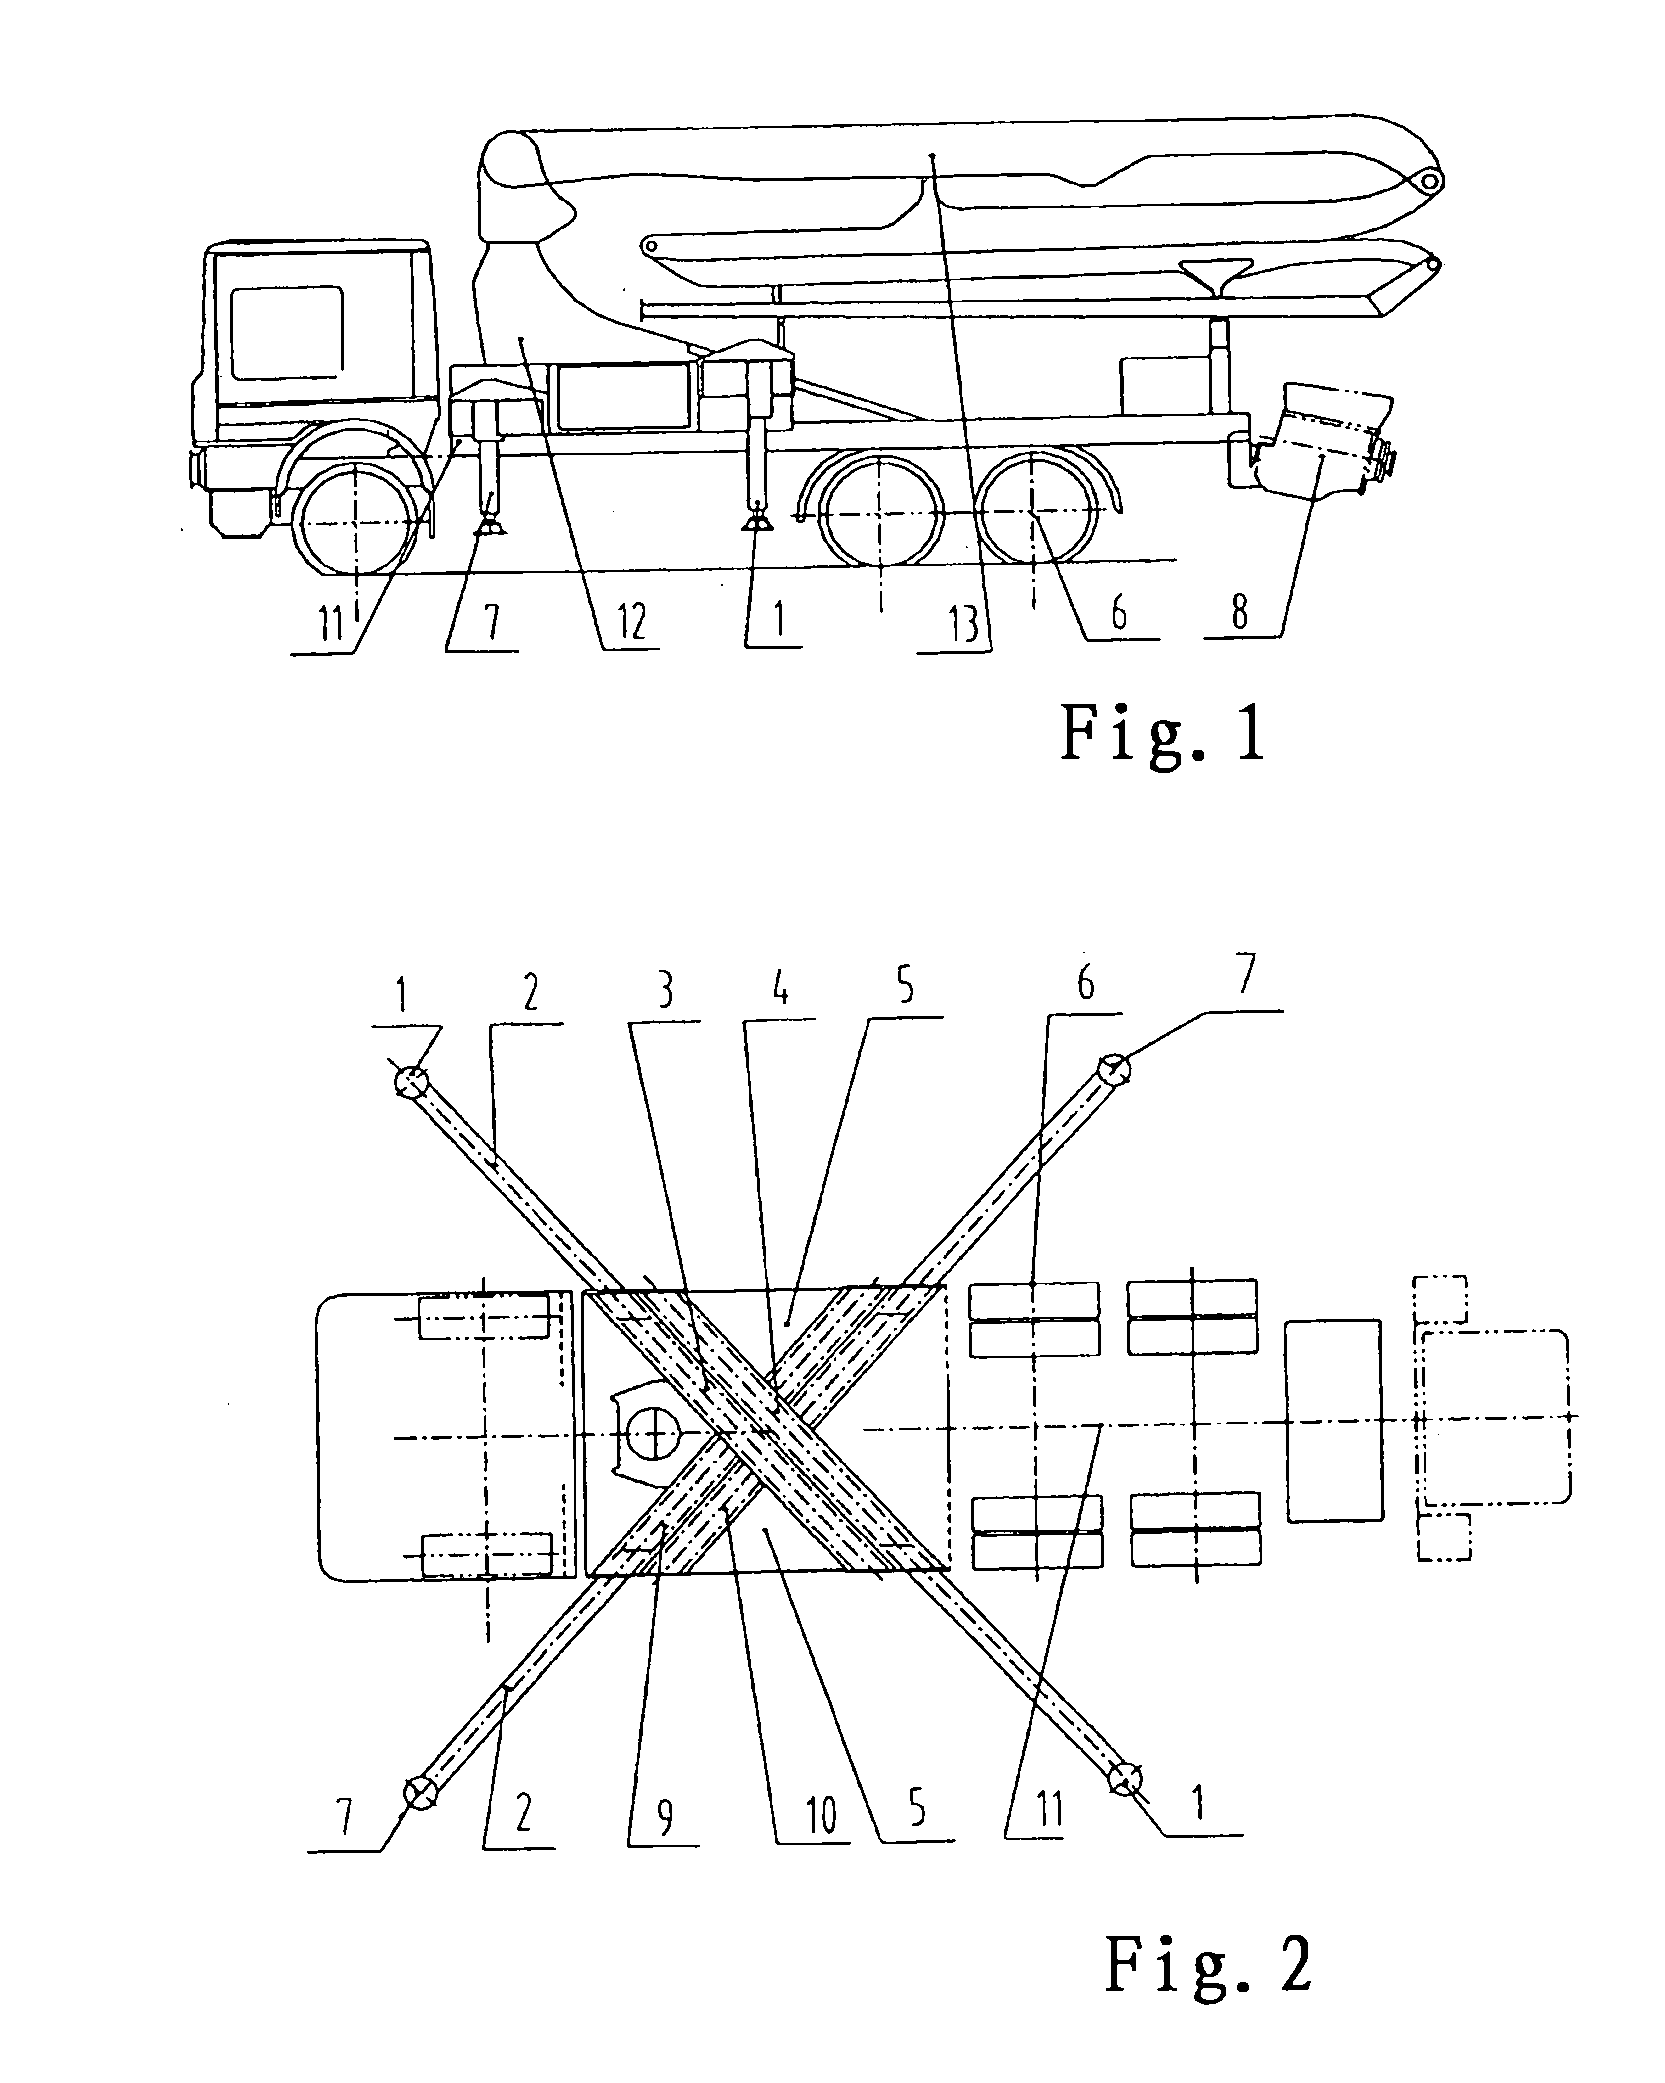 Support device for walking machines